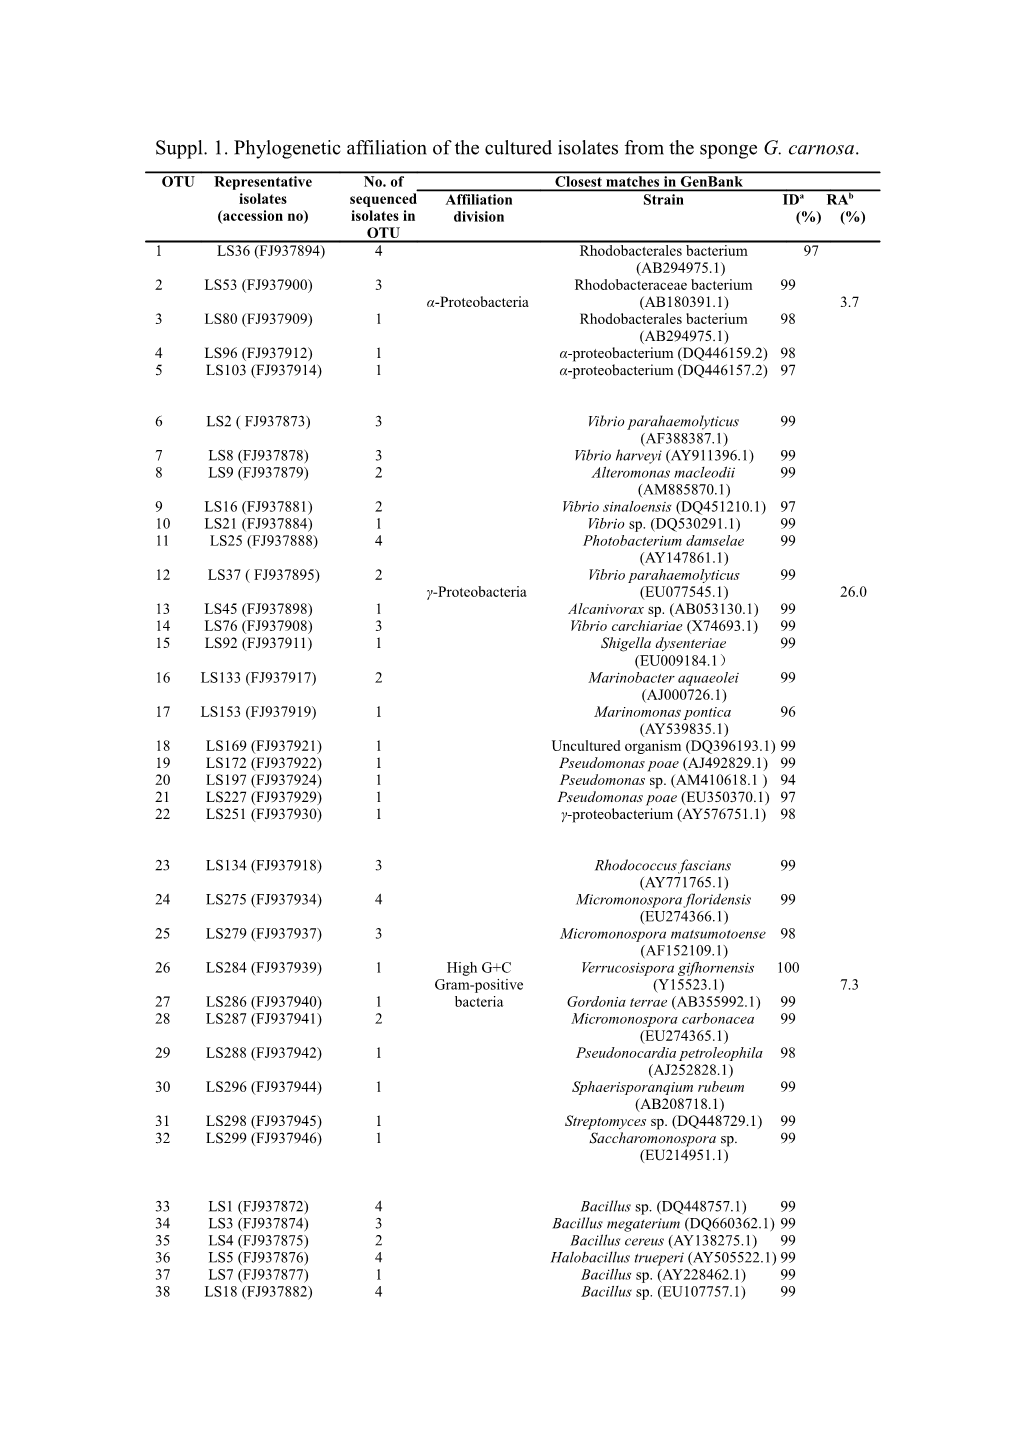 Suppl. 1.Phylogenetic Affiliation of the Cultured Isolates from the Sponge G. Carnosa